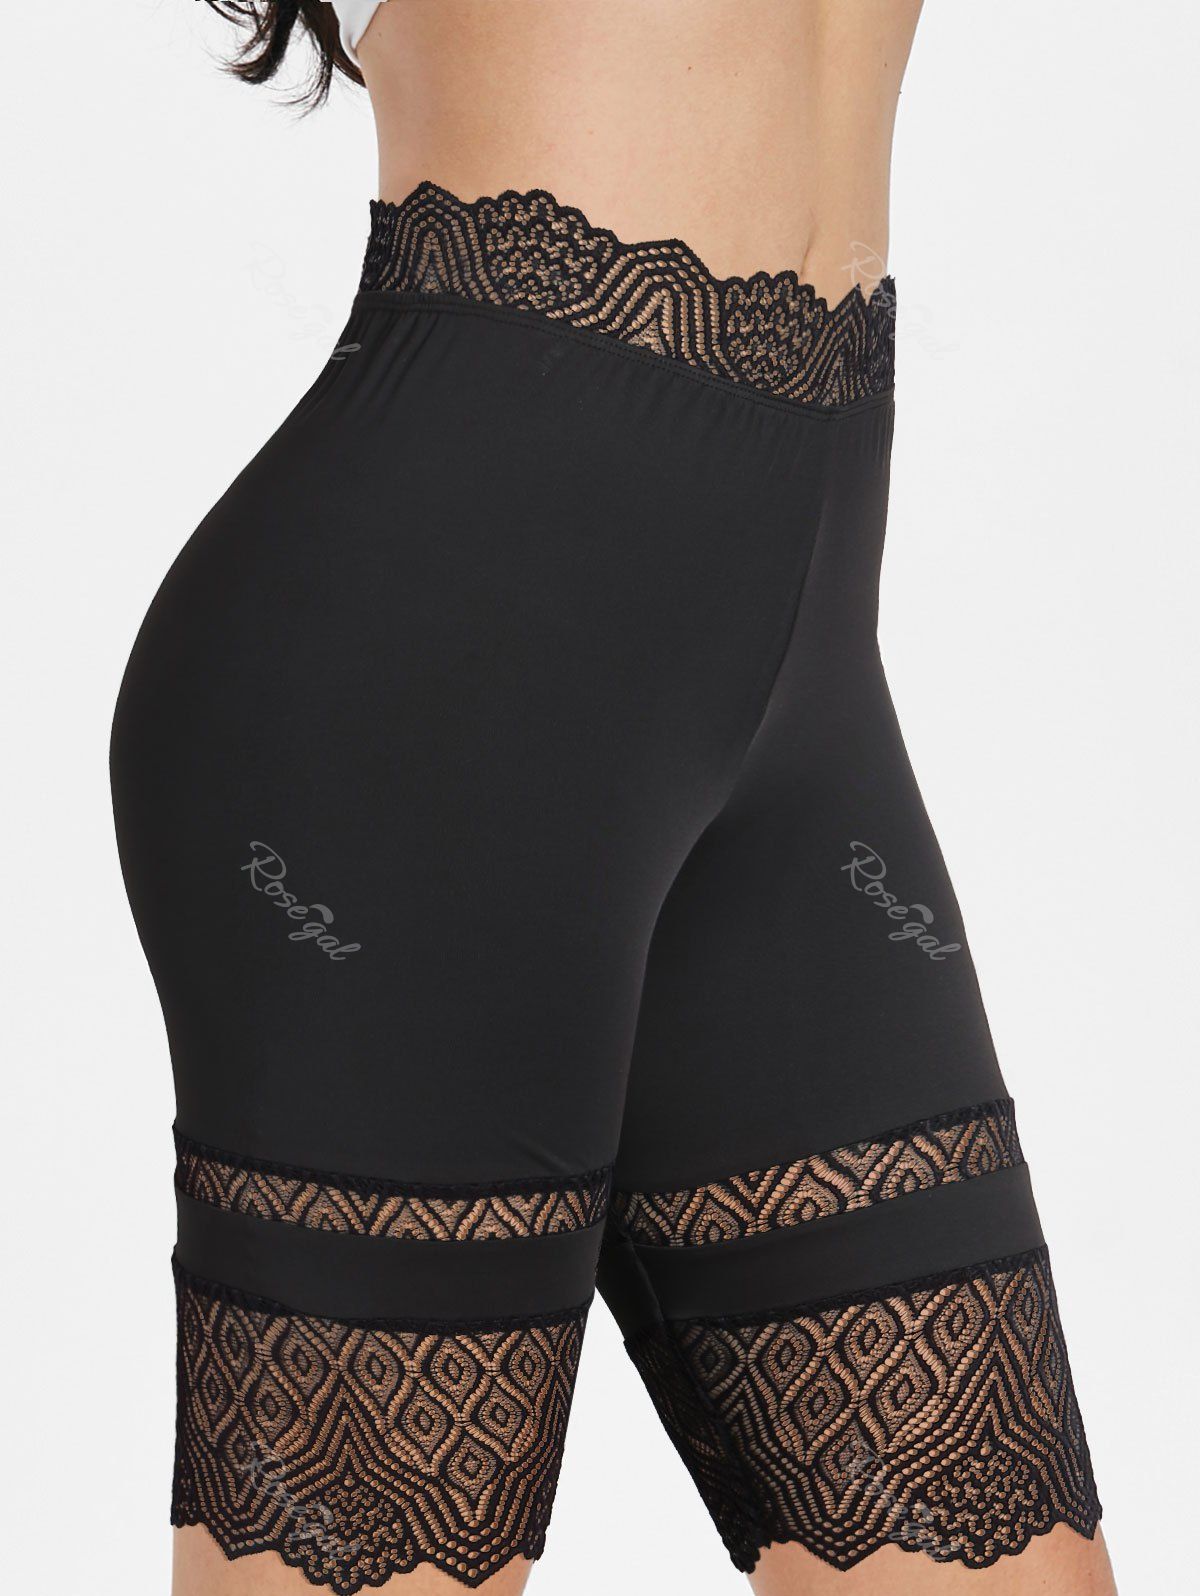 Unique High Waisted Lace Insert Skinny Leggings  